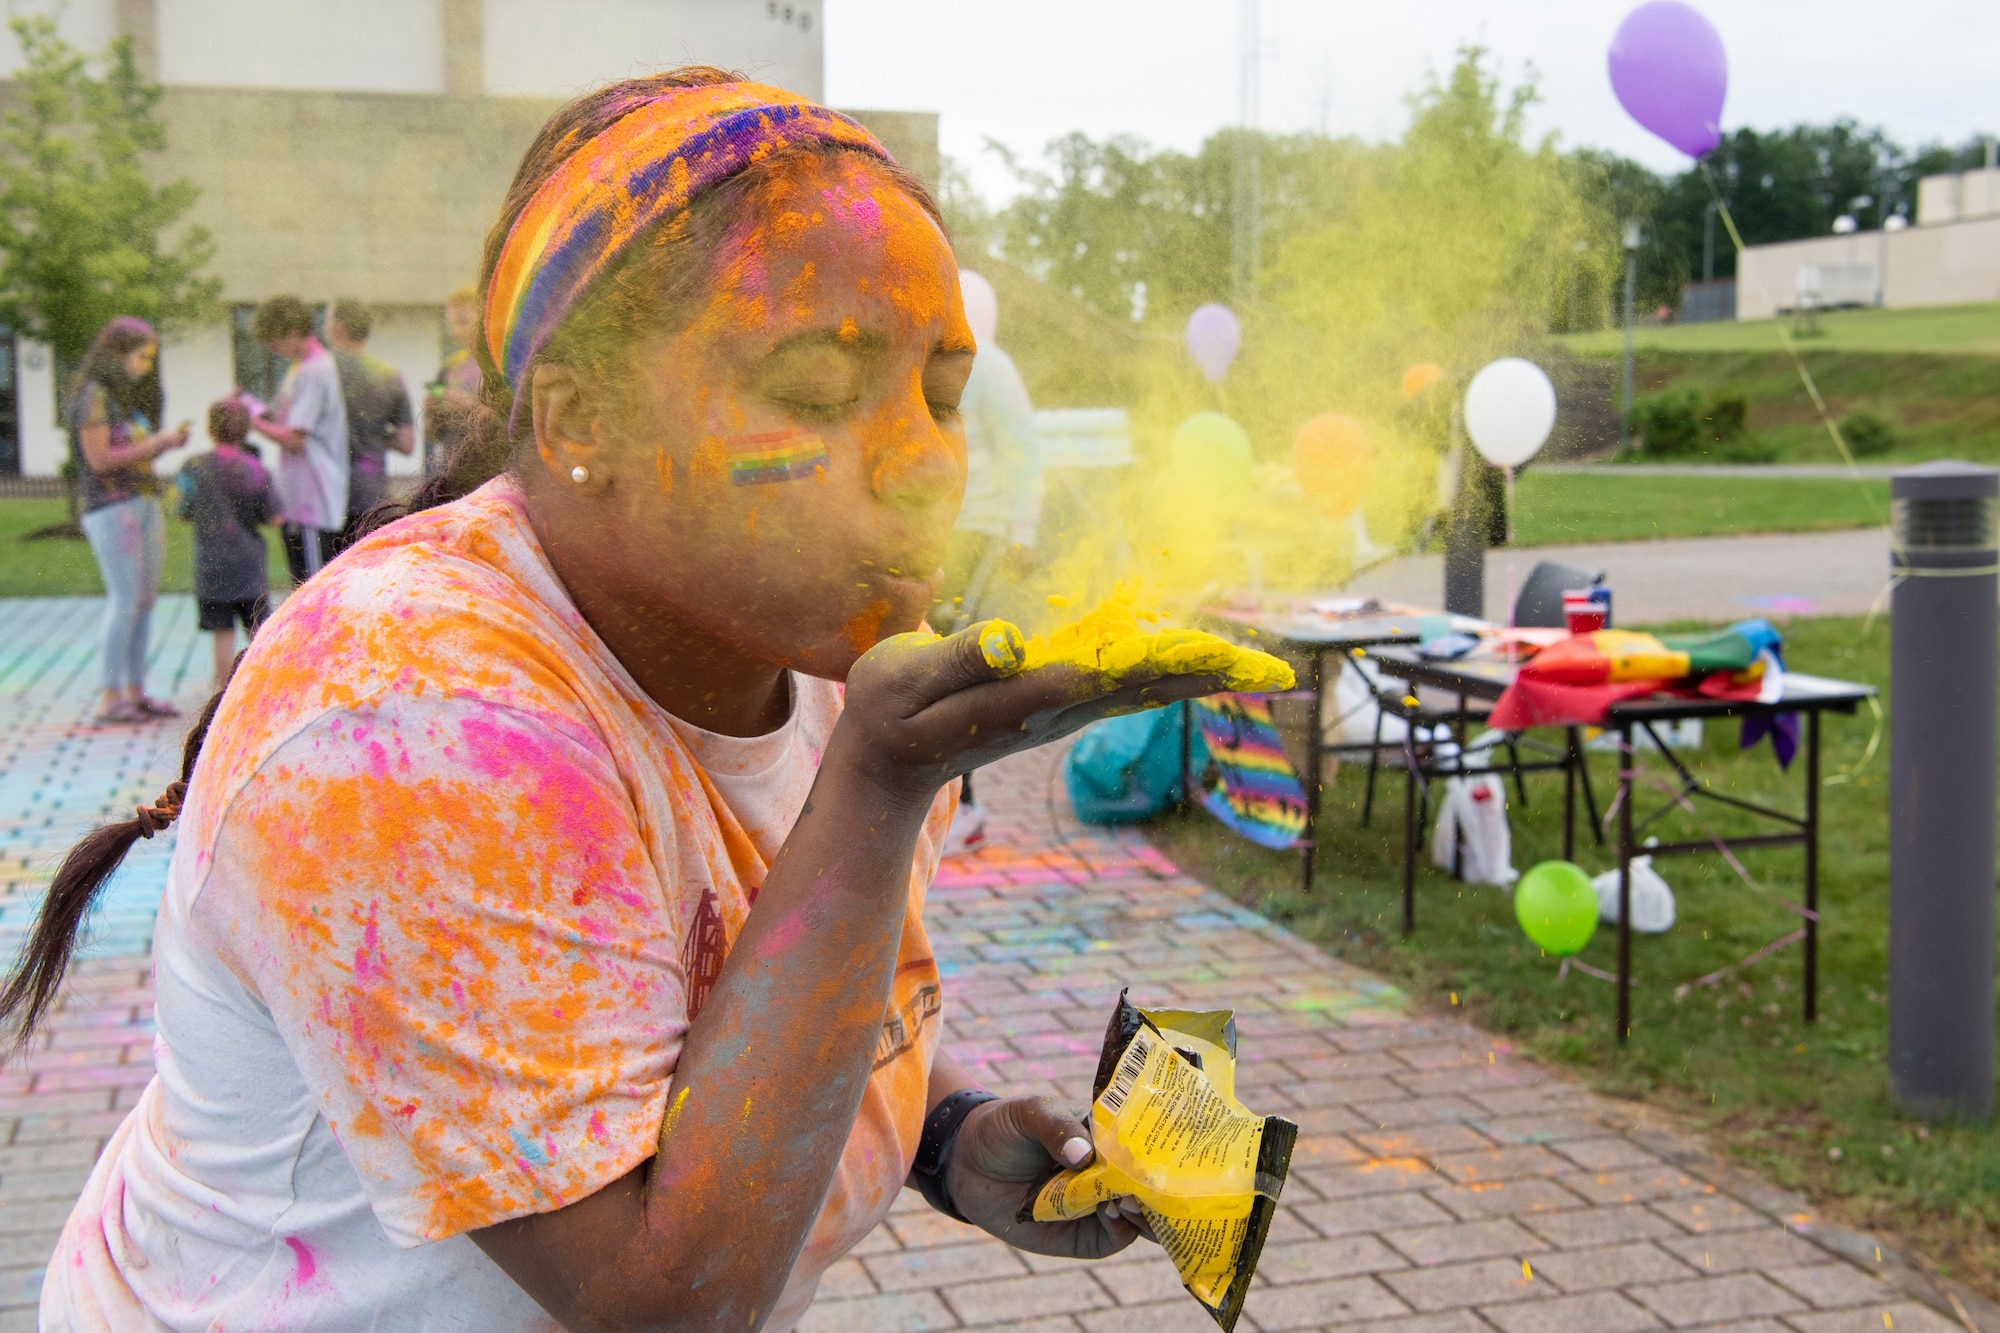 U.S. Air Force Tech. Sgt. Jahairy Casado, 52nd Civil Engineer Squadron NCO  in charge of service contracts, blows colored powder in the air during a color run, June 30, 2021, on Spangdahlem Air Base, Germany. During lesbian, gay, bisexual, transgender, and queer Pride Month, the United States reflects on individuals who continue to fight for equality and for the ability to live freely as U.S. citizens. (U.S. Air Force photo by Staff Sgt. Melody W. Howley)